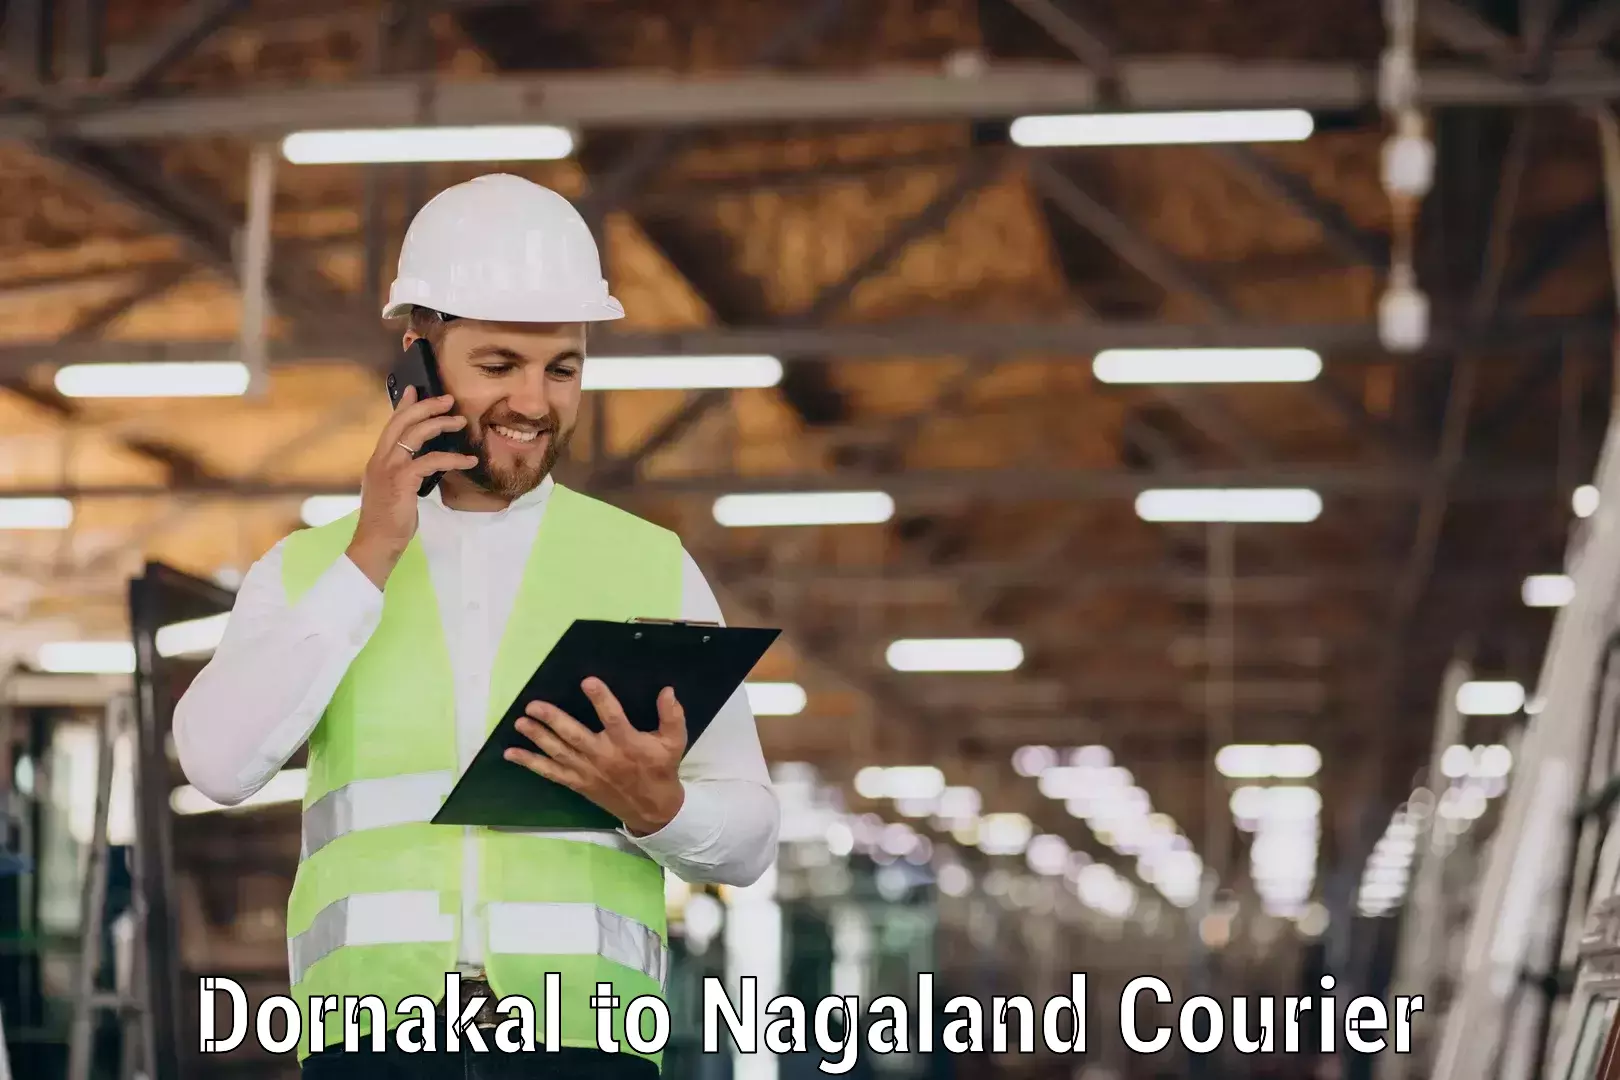 Online package tracking Dornakal to Nagaland